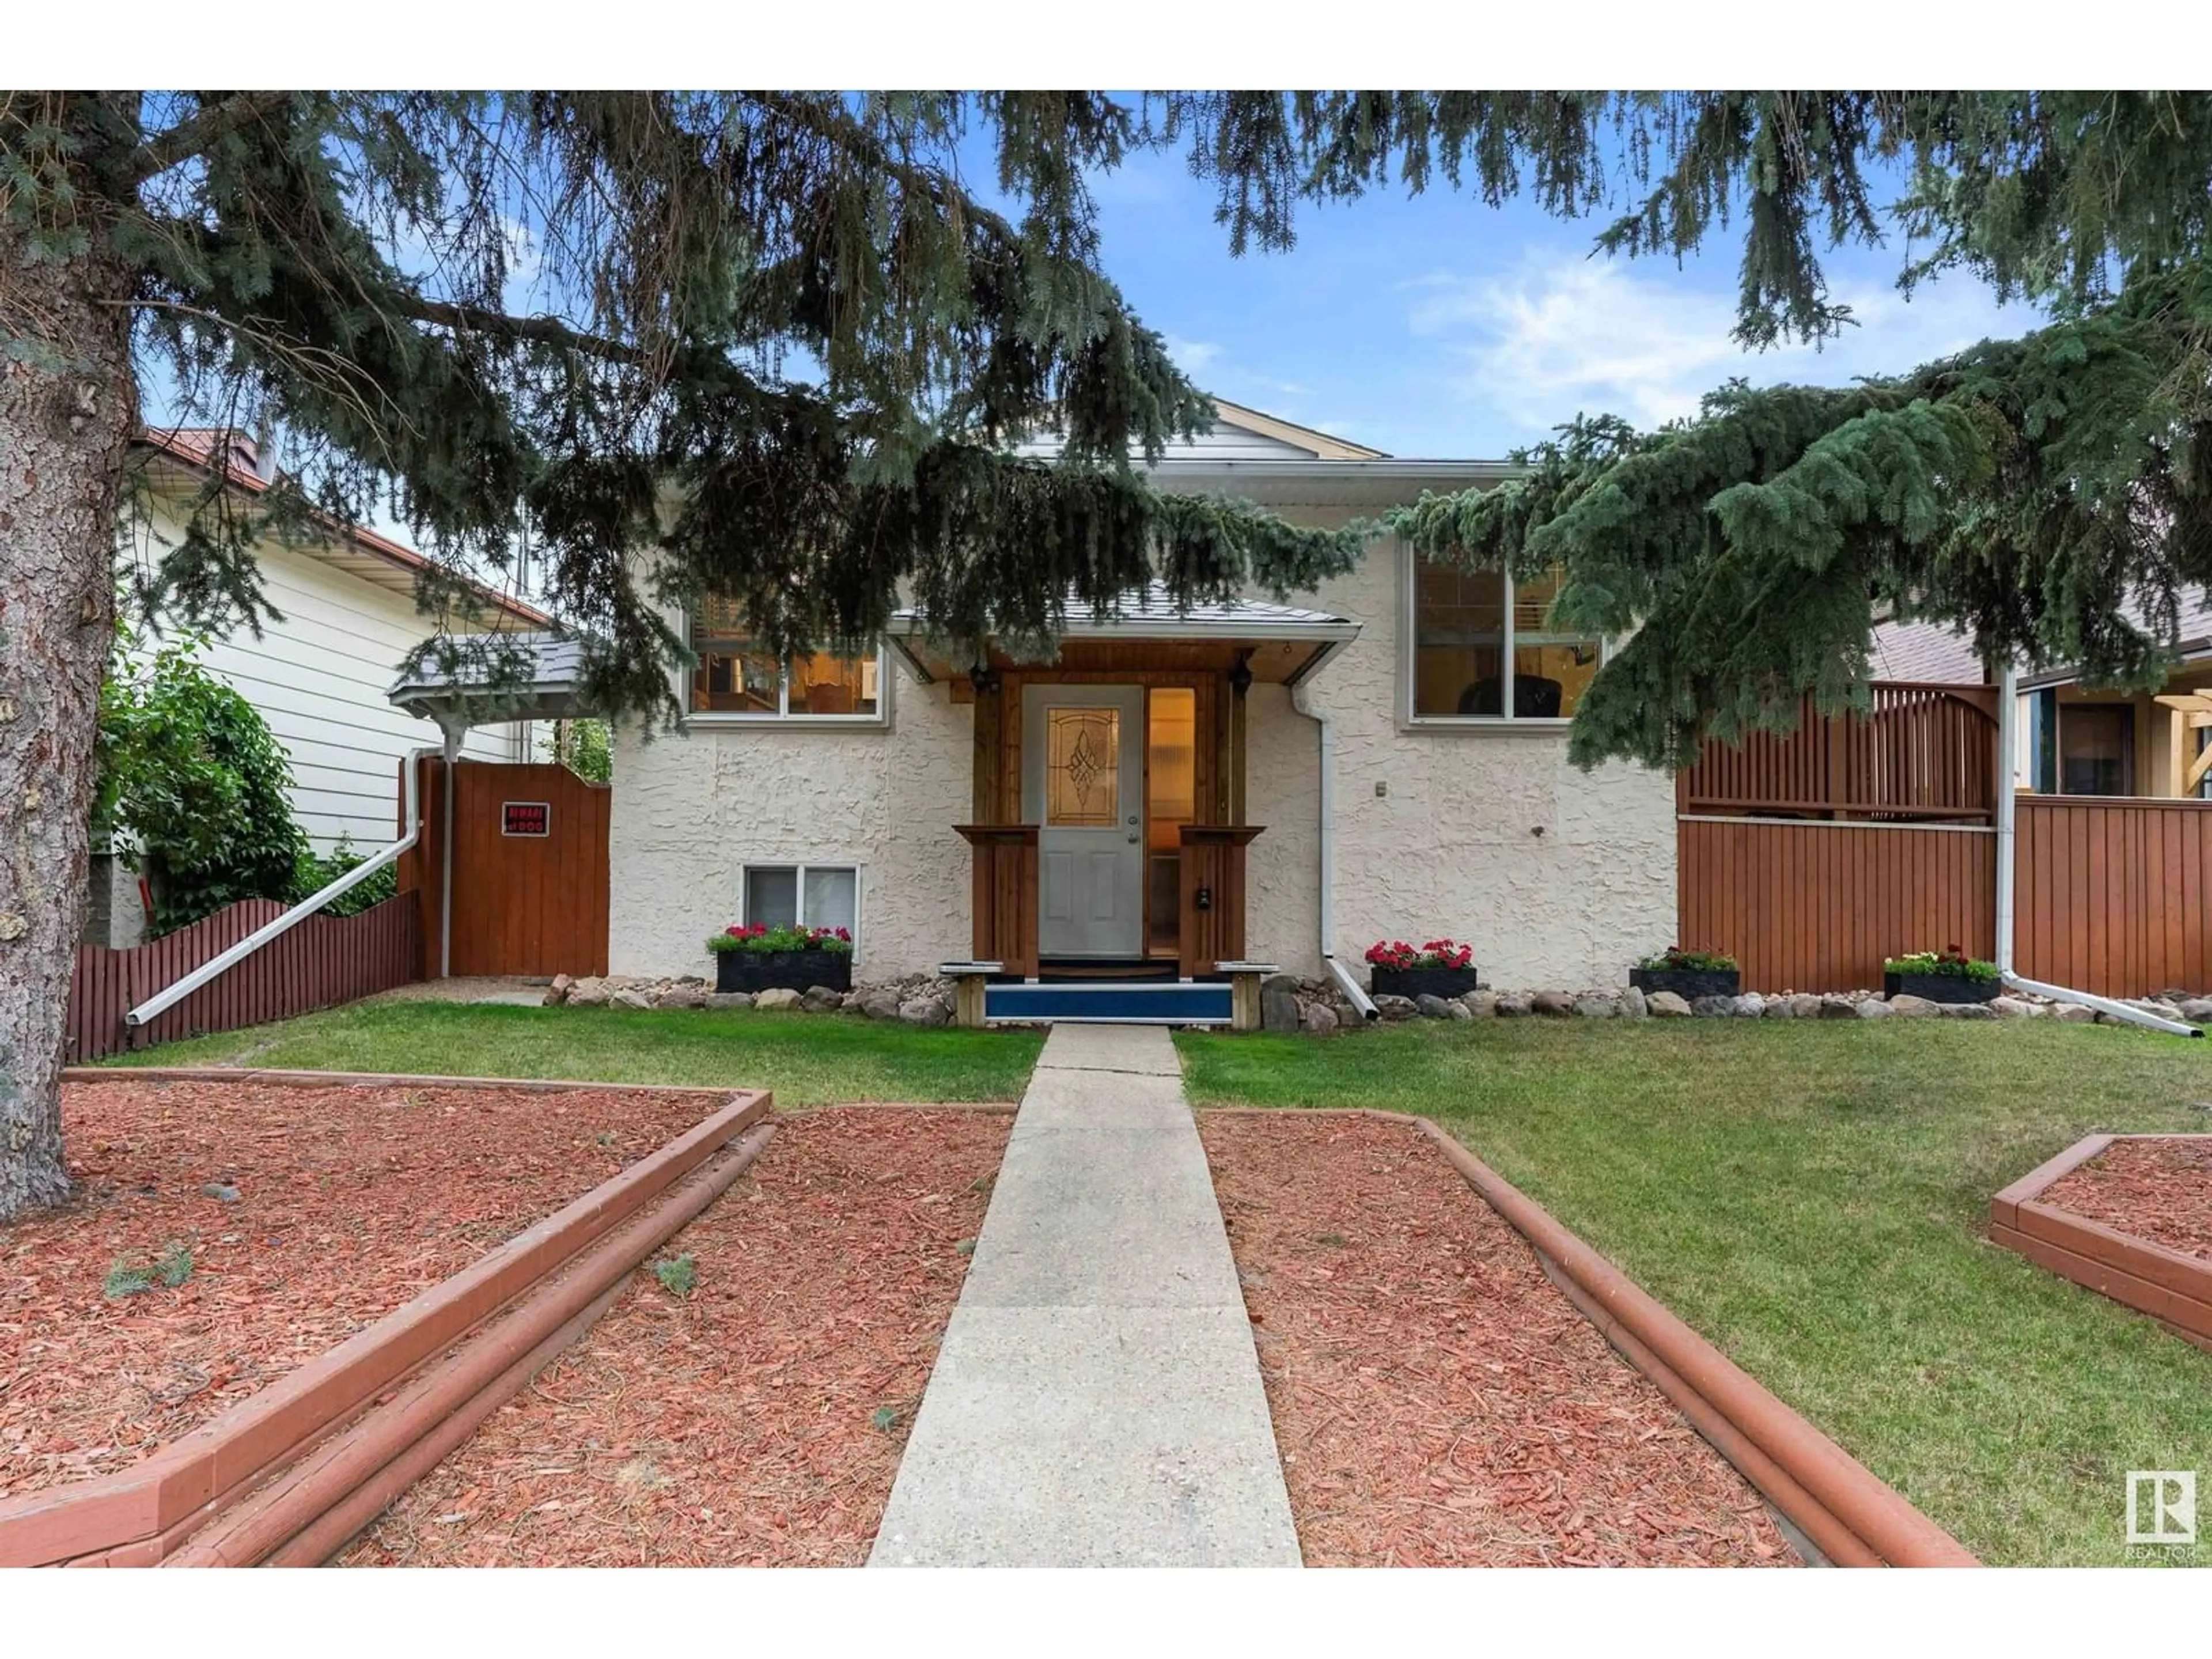 Frontside or backside of a home for 2643 89 ST NW, Edmonton Alberta T6K2Y9